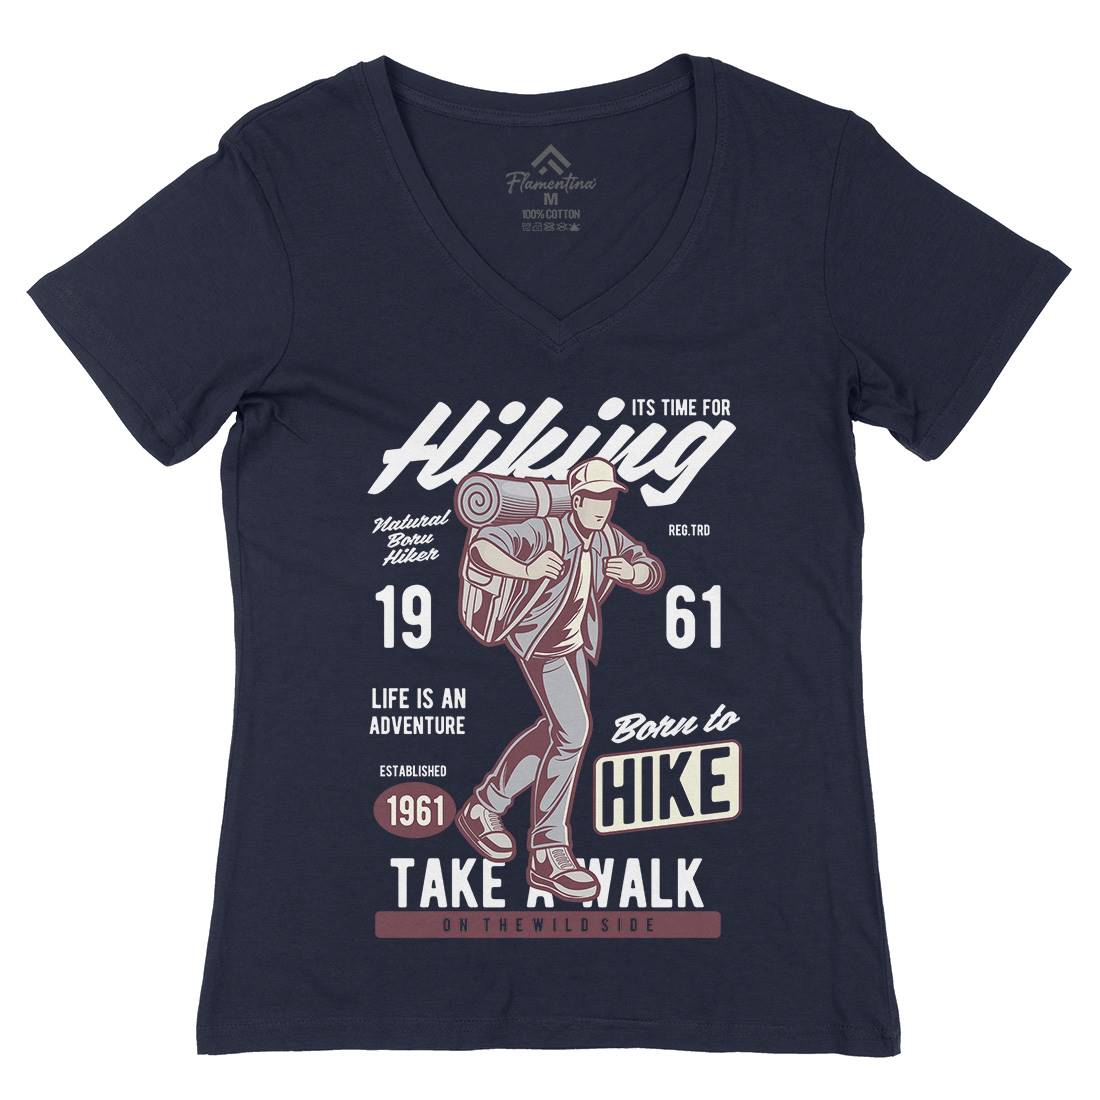 Its Time For Hiking Womens Organic V-Neck T-Shirt Nature C382